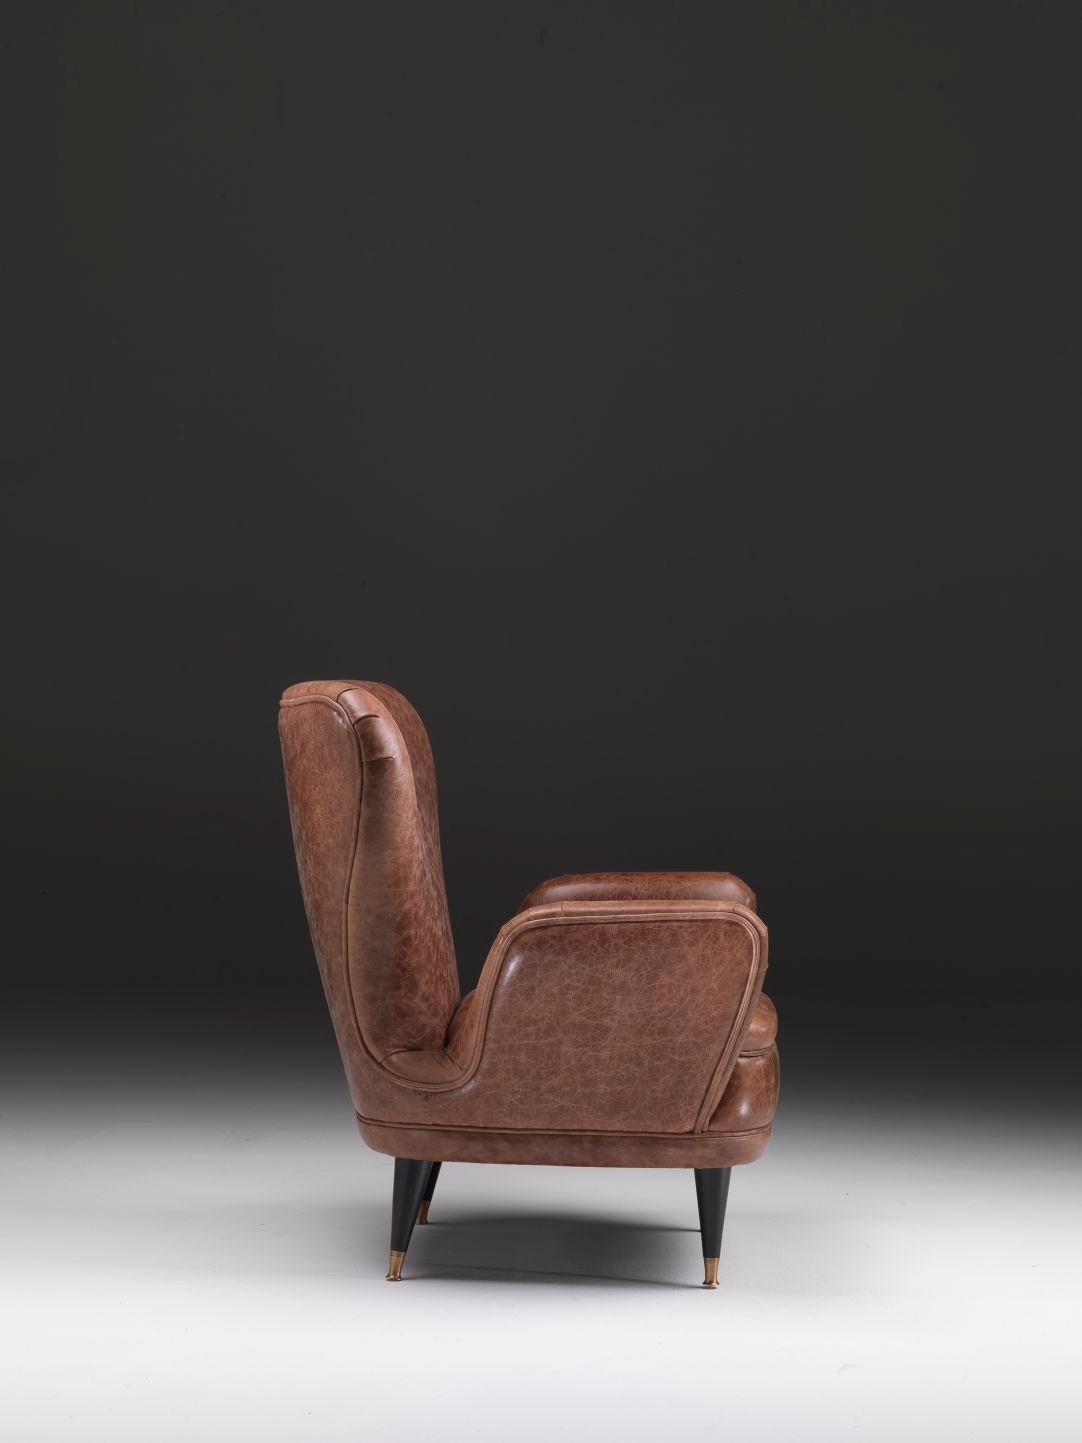 PIERA Armchair with Brown Leather in Solid Walnut with Brass Tips  In New Condition For Sale In Lentate sul Seveso, Monza e Brianza